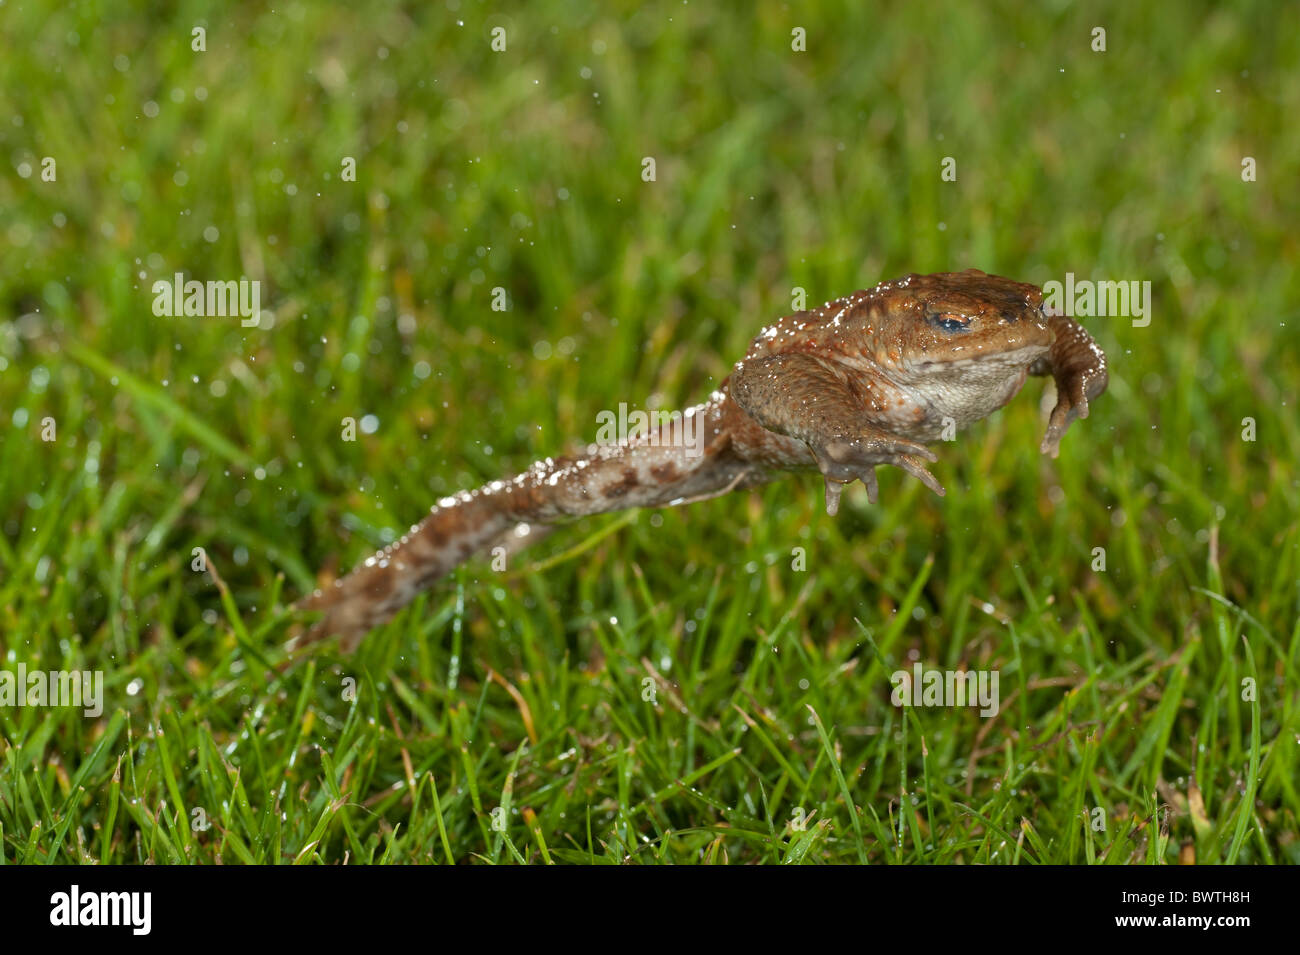 Common Toad leaping Bufo bufo UK Stock Photo